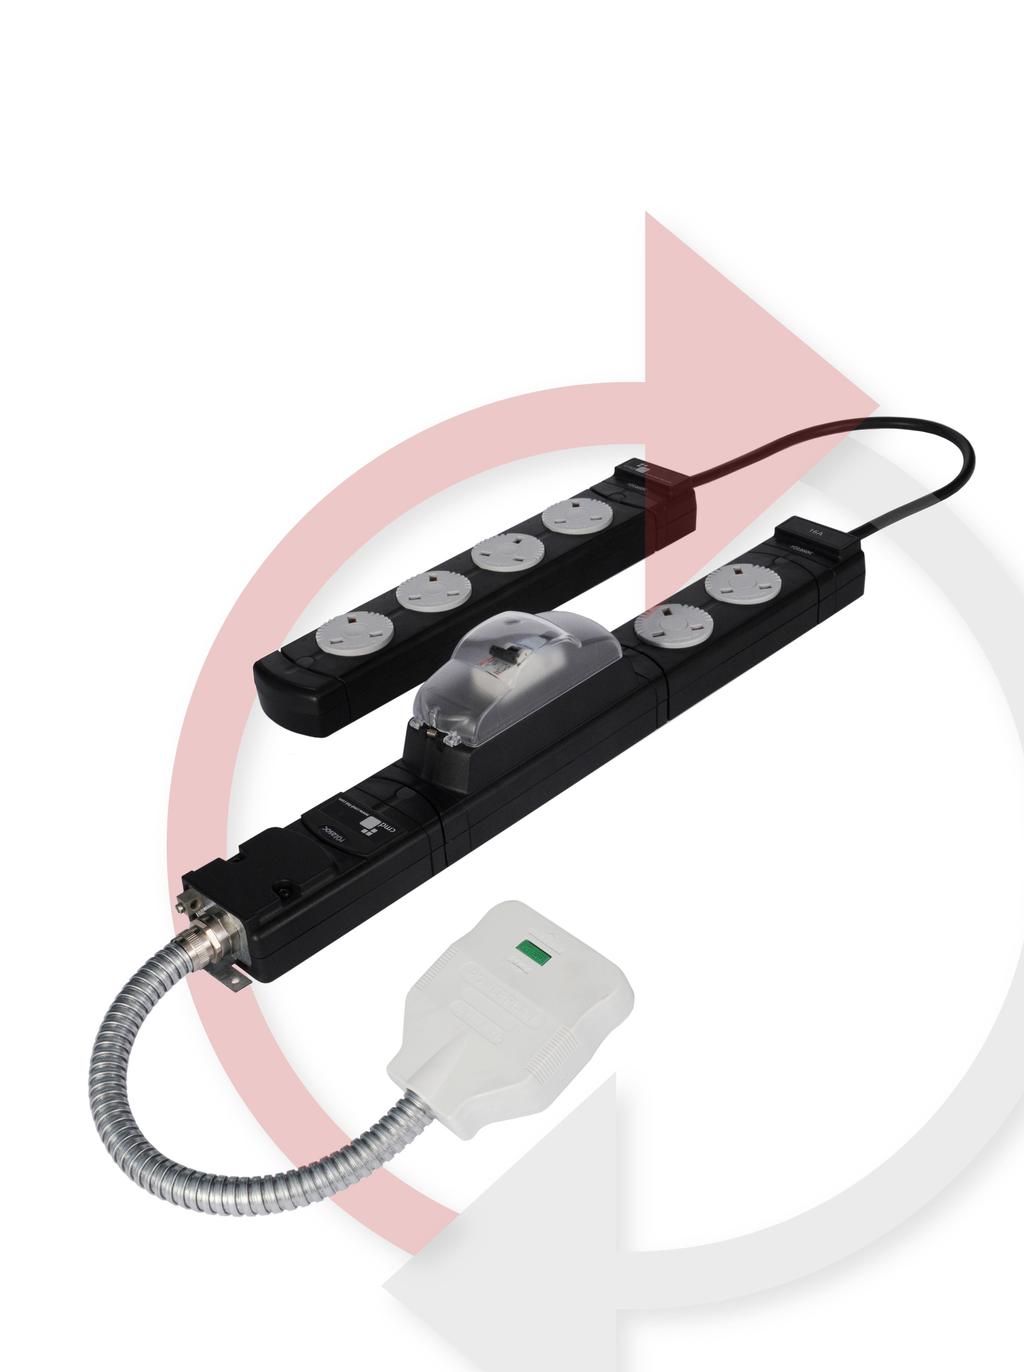 Under Desk Power Rotasoc is widely considered to be the industry standard for customisable under desk power as it includes a comprehensive selection of multi-socket power and data modules with 360